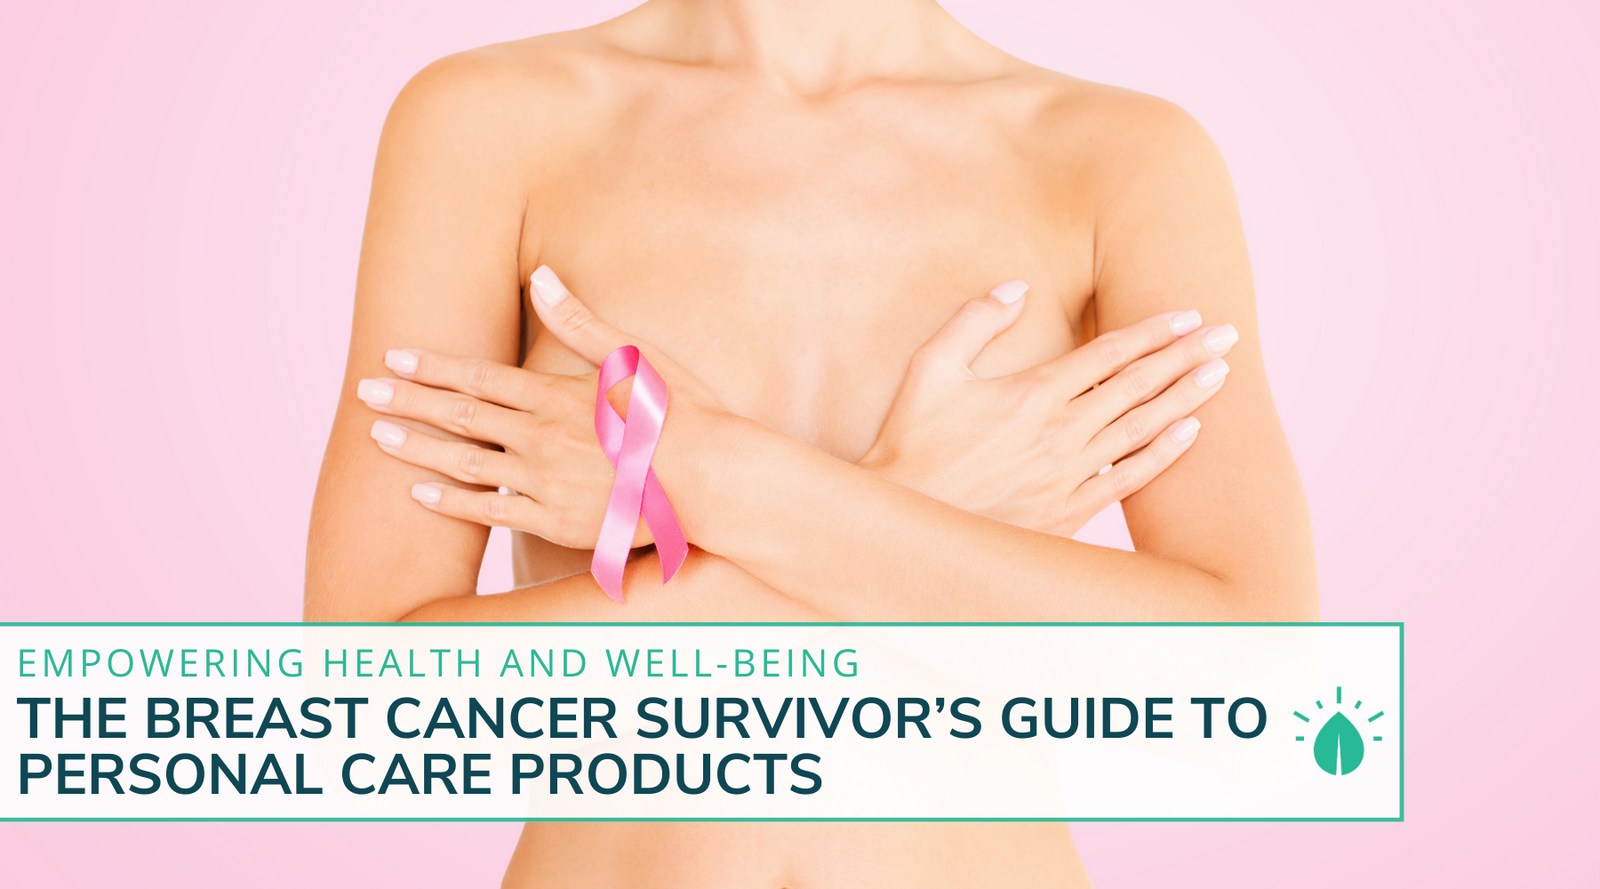 The Breast Cancer Survivor's Guide To Personal Care Products